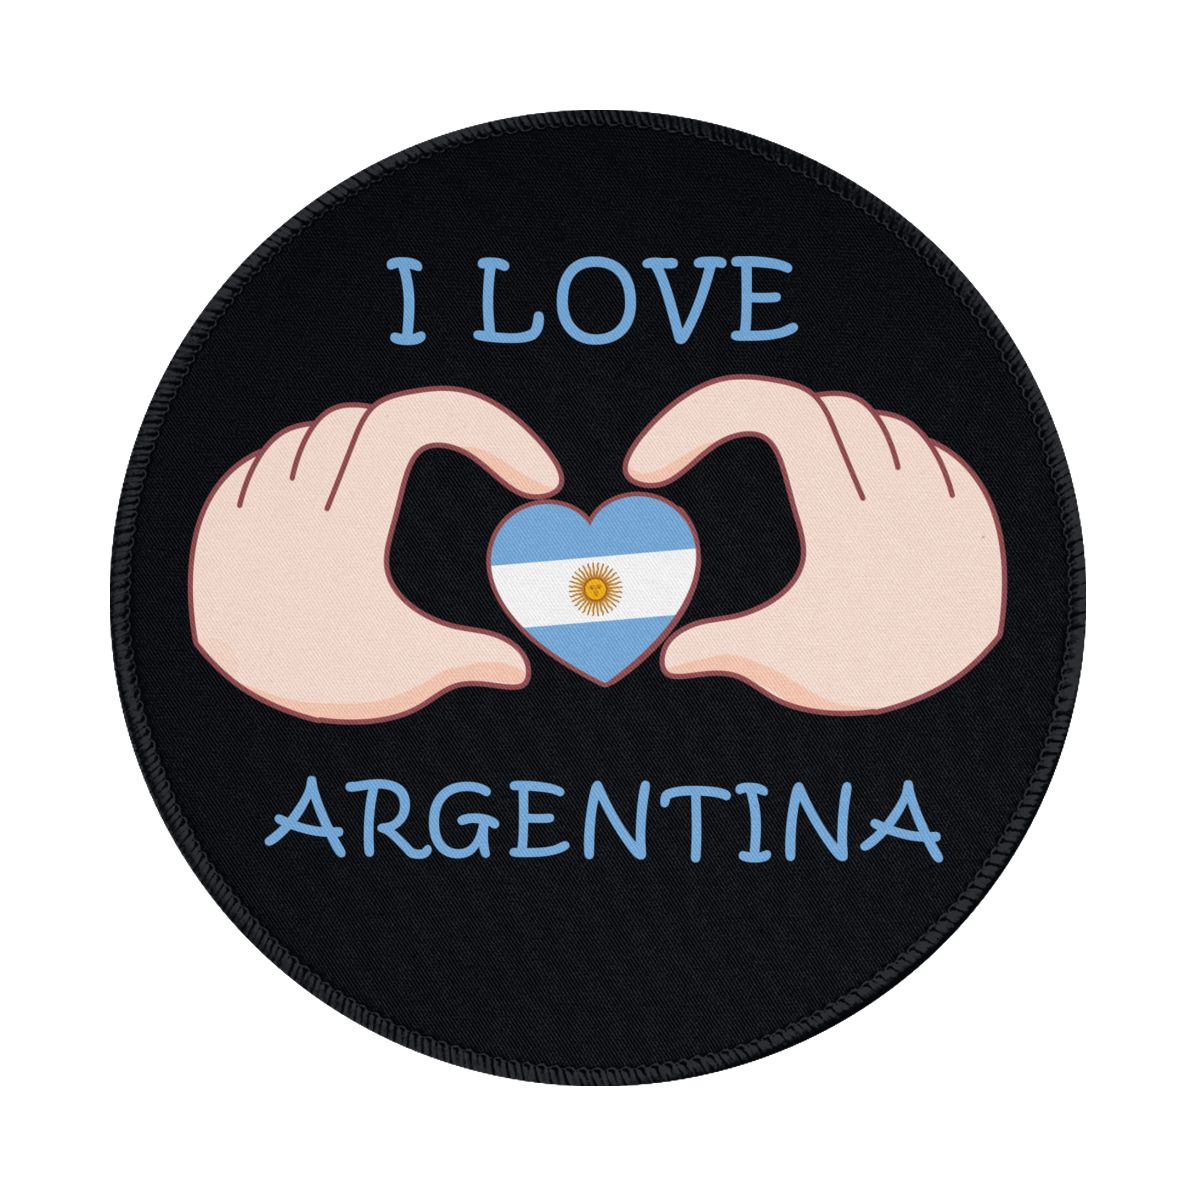 I Love Argentina Round Non-Slip Thick Rubber Modern Gaming Mousepad